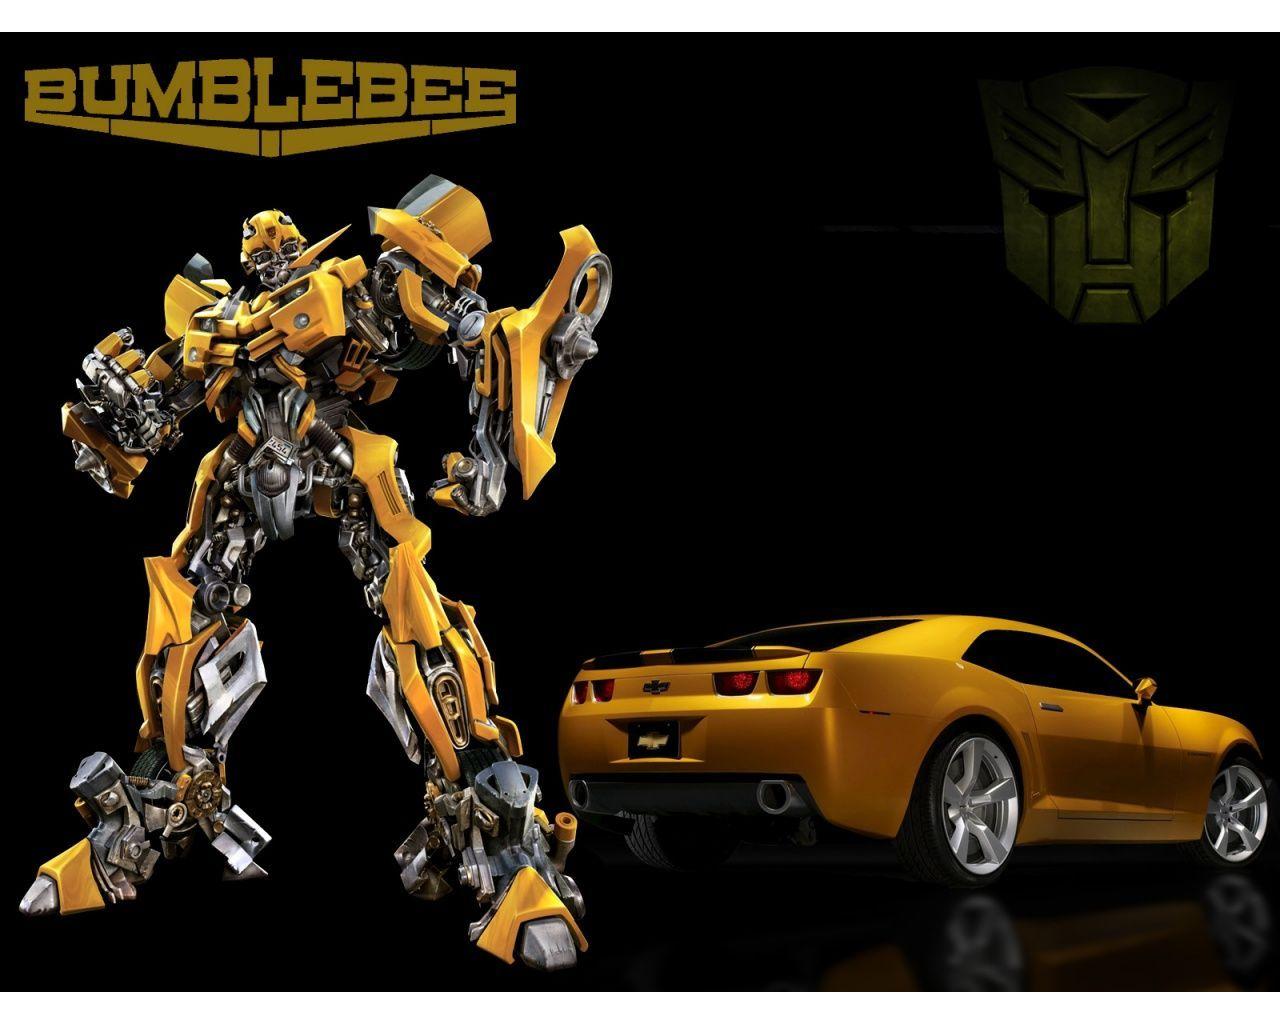 Transformers Bumblebee iPhone 5s Wallpaper Car Picture